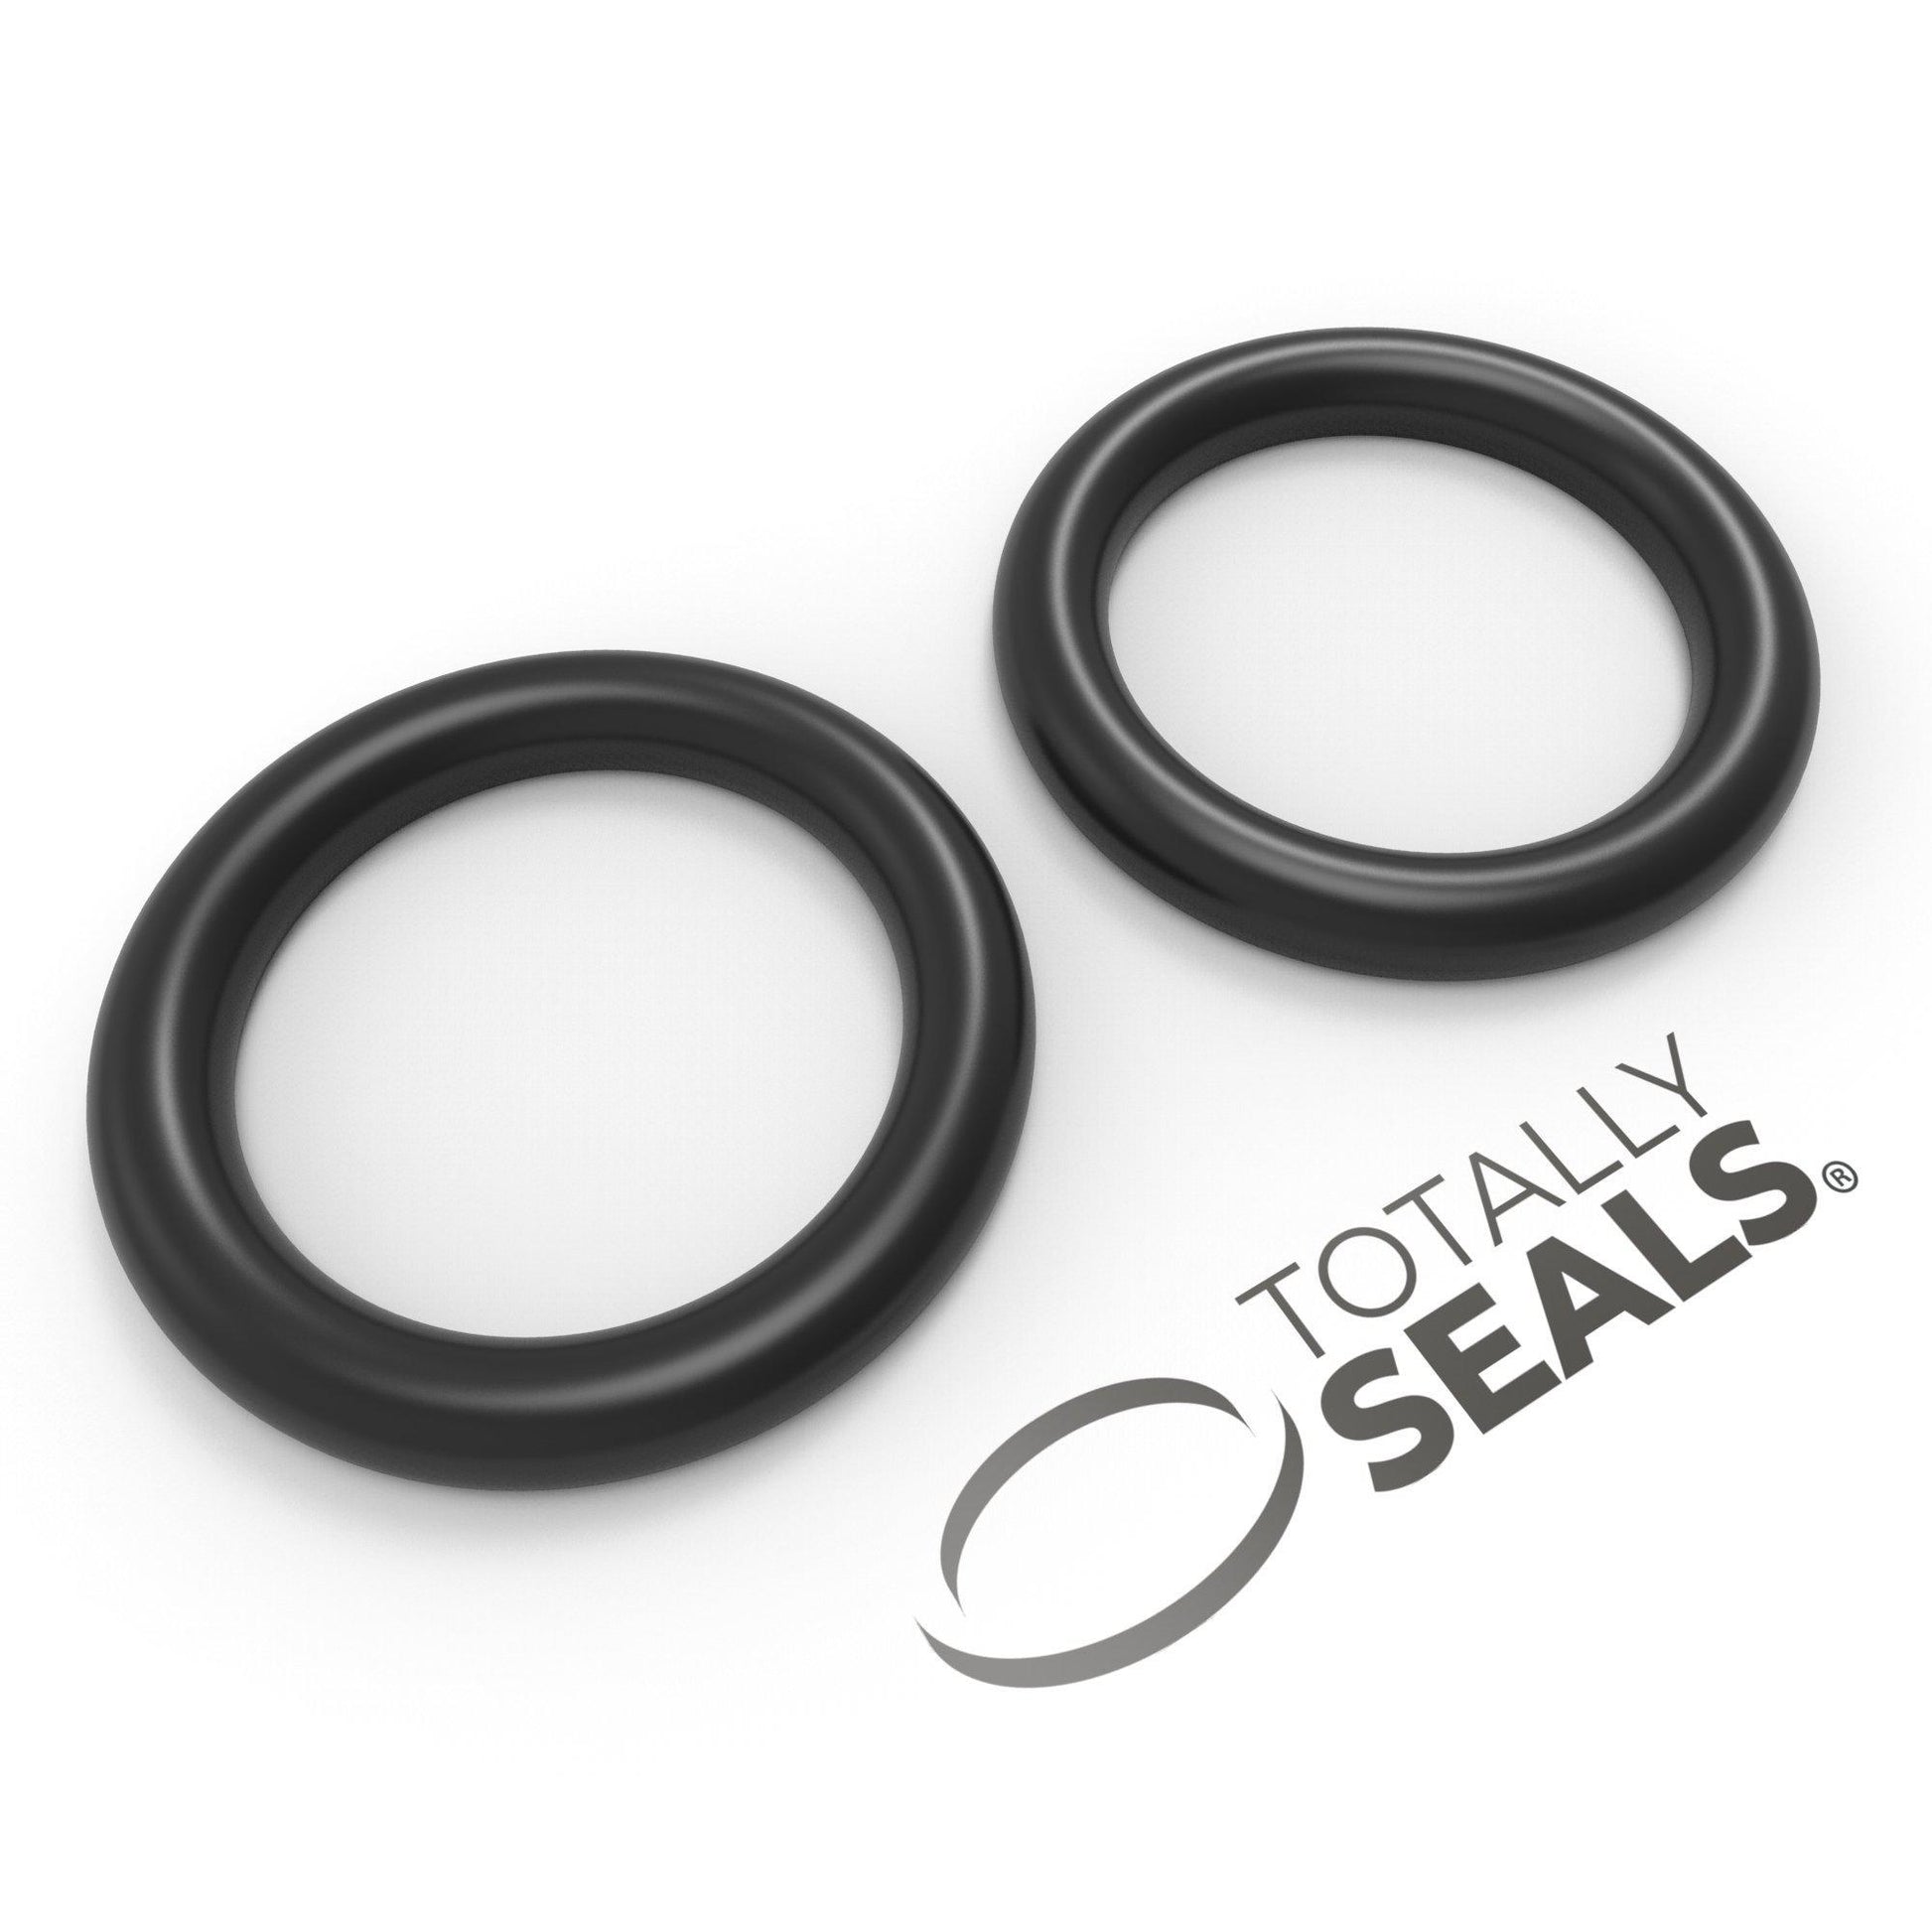 20mm x 1mm (22mm OD) Nitrile O-Rings - Totally Seals®